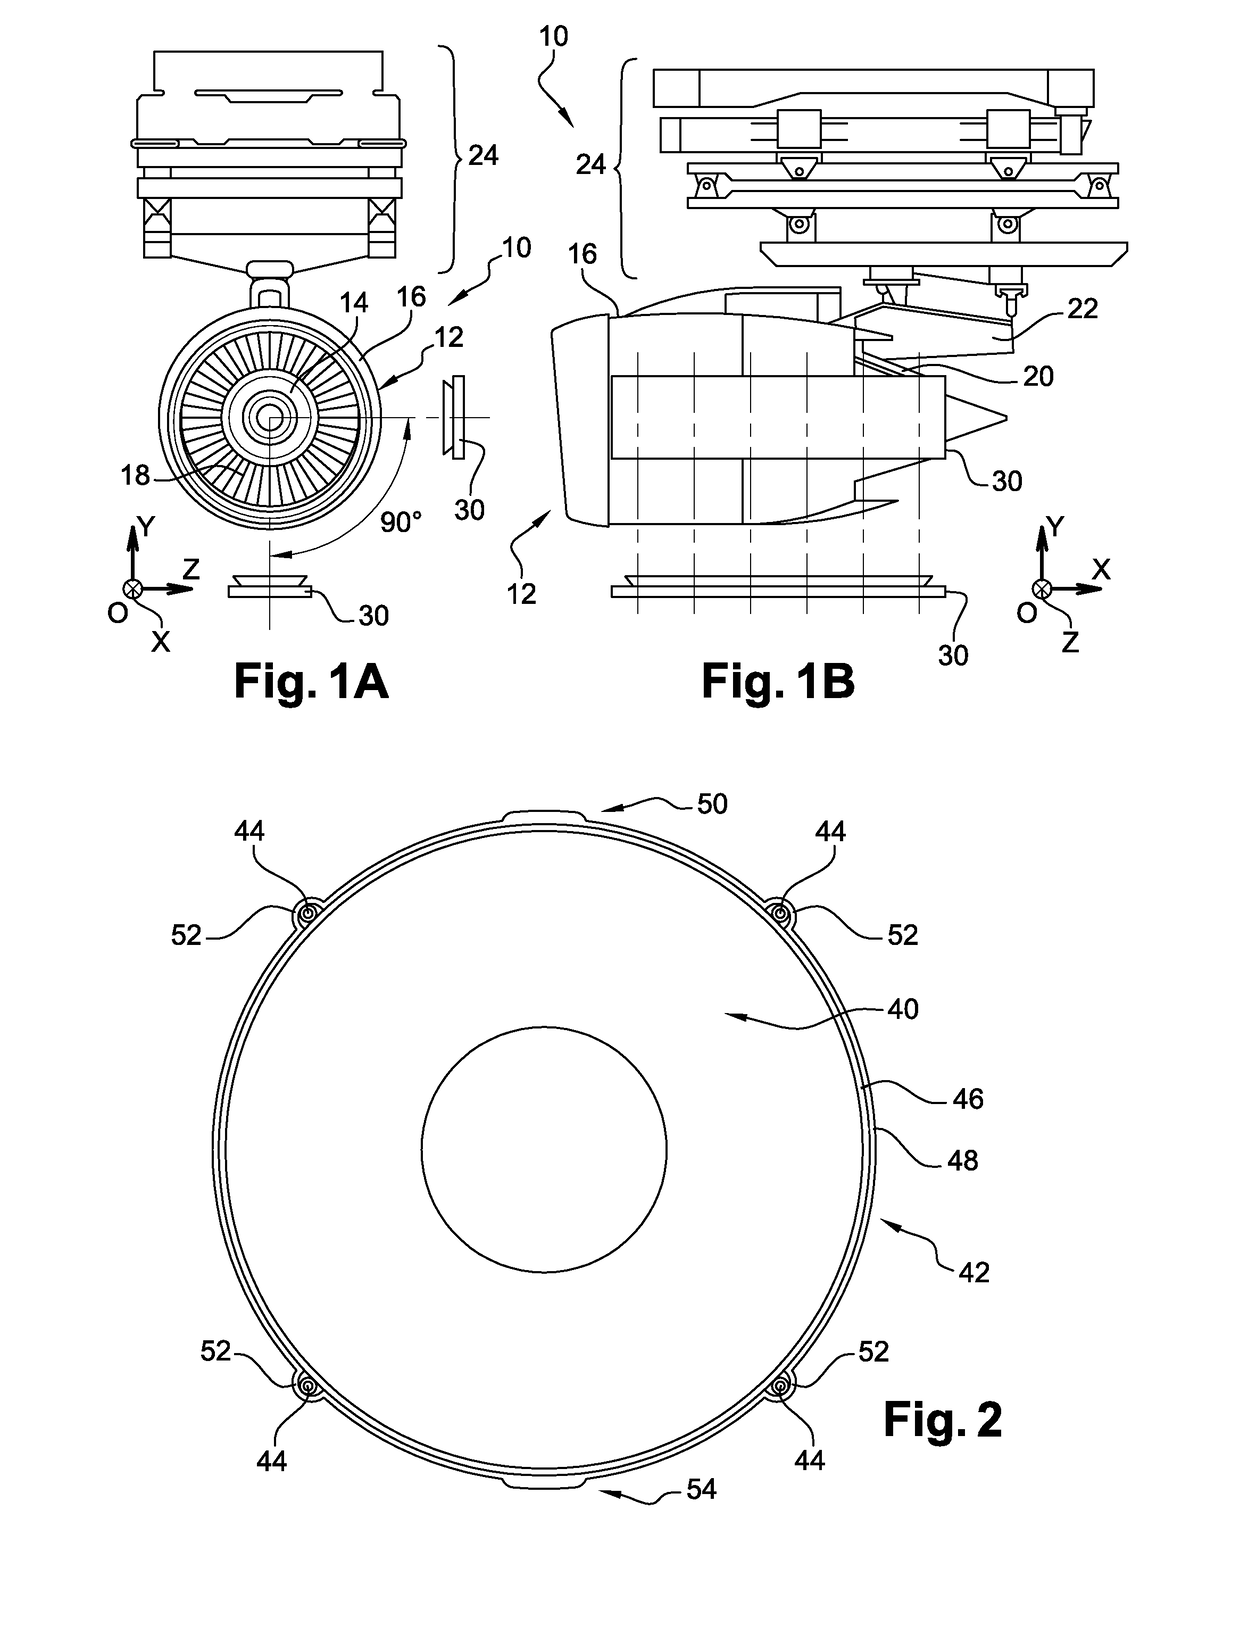 Method for measuring the kinematics of at least one turbomachine rotor